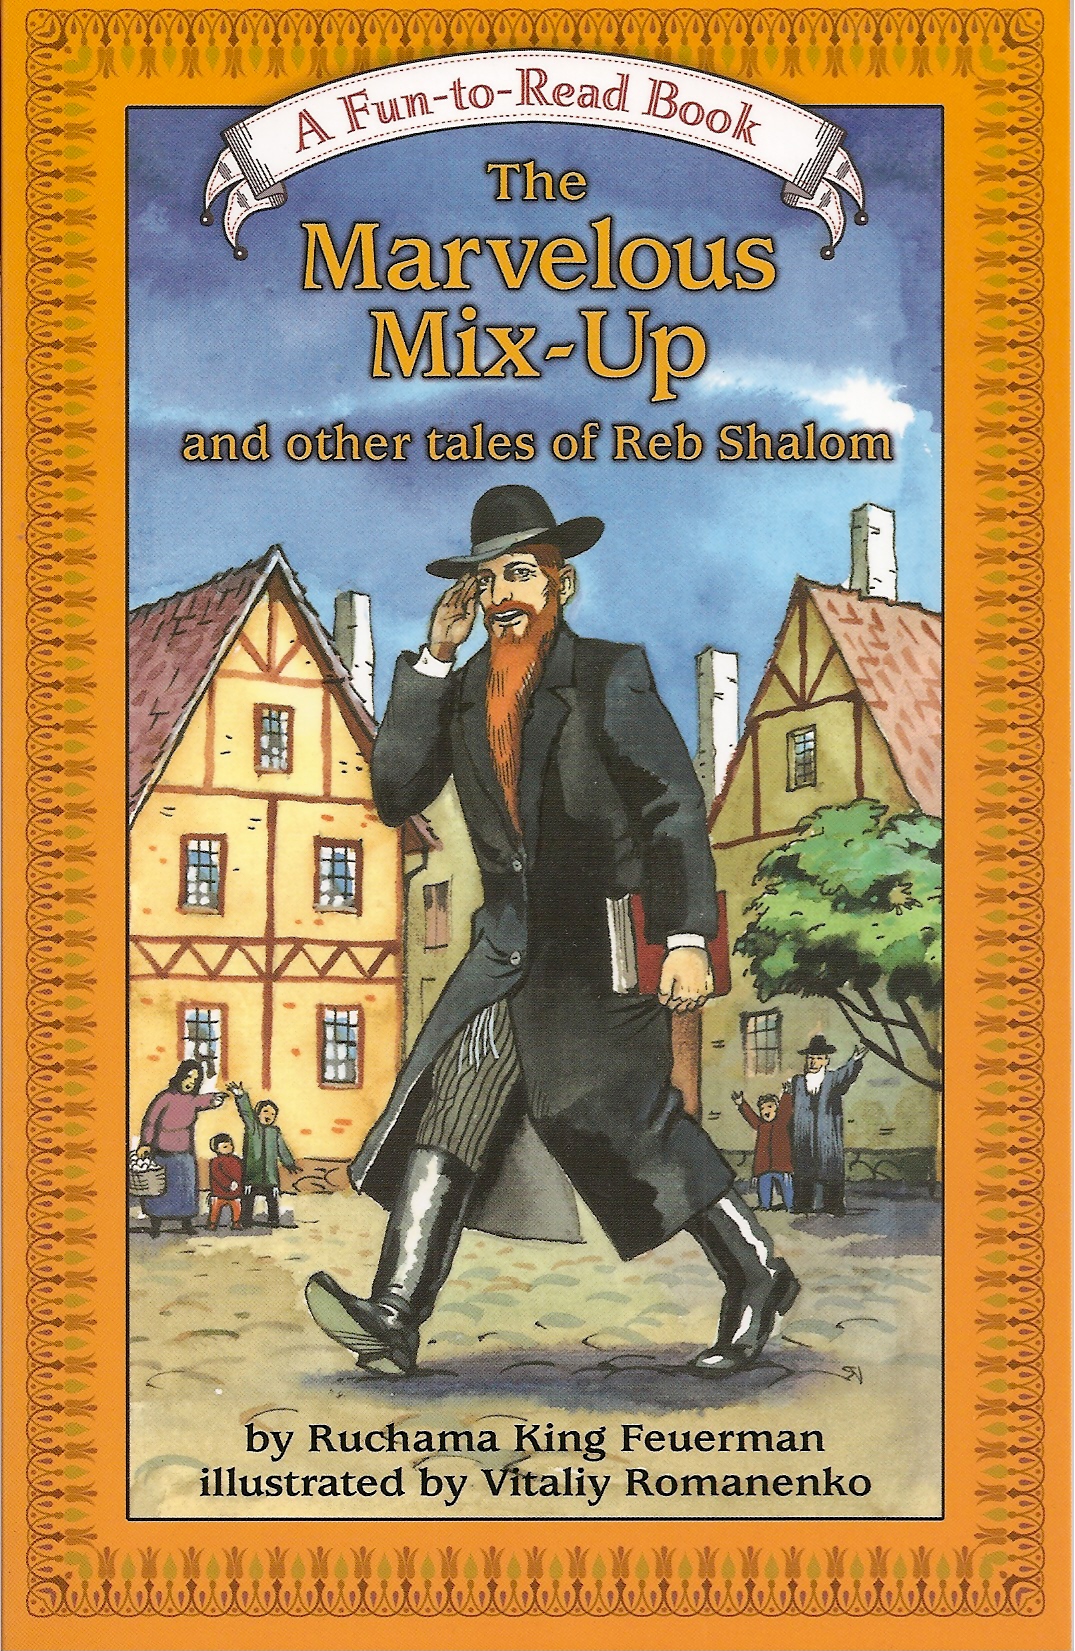 Marvelous Mix Up and other tales of Reb Shalom